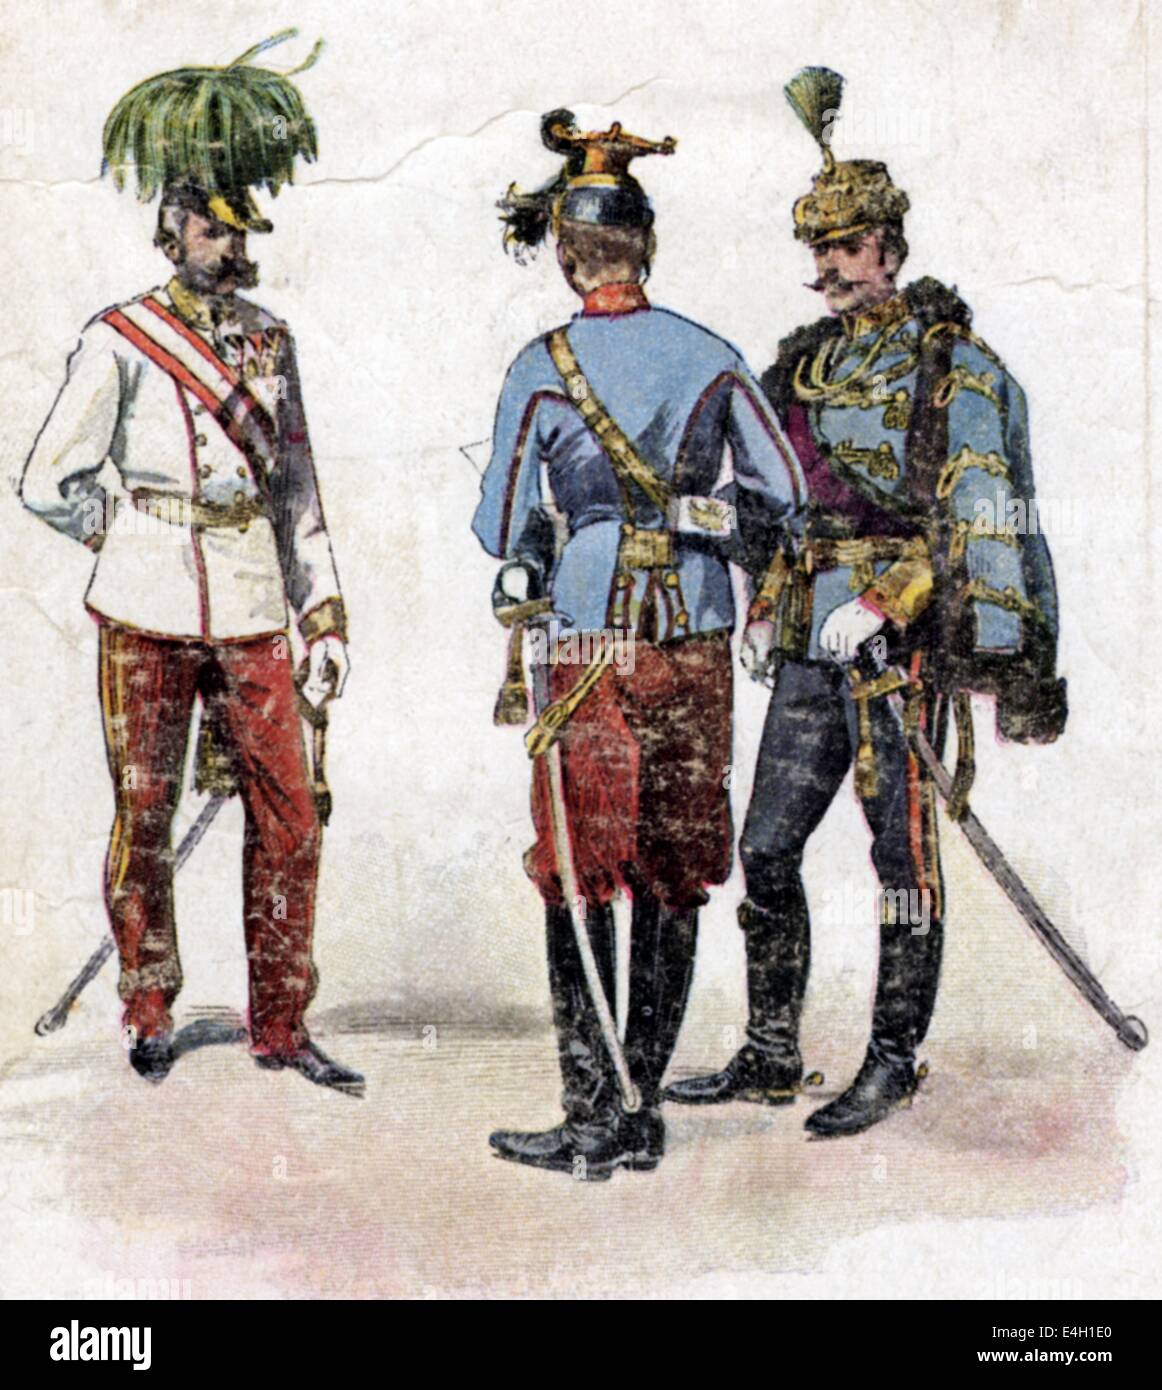 military, Austria-Hungary, uniforms, late 19th century, general in German gala uniform, Uhlan officer, general in Hungarian dress uniform, colour print, Austria Hungary, Austrian, Hungarian, officers, officer, Uhlan, Uhlans, hussar, hussars, parades, military parade, helmets, helmet, sabre, sabres, historic, historical, people, Additional-Rights-Clearences-Not Available Stock Photo